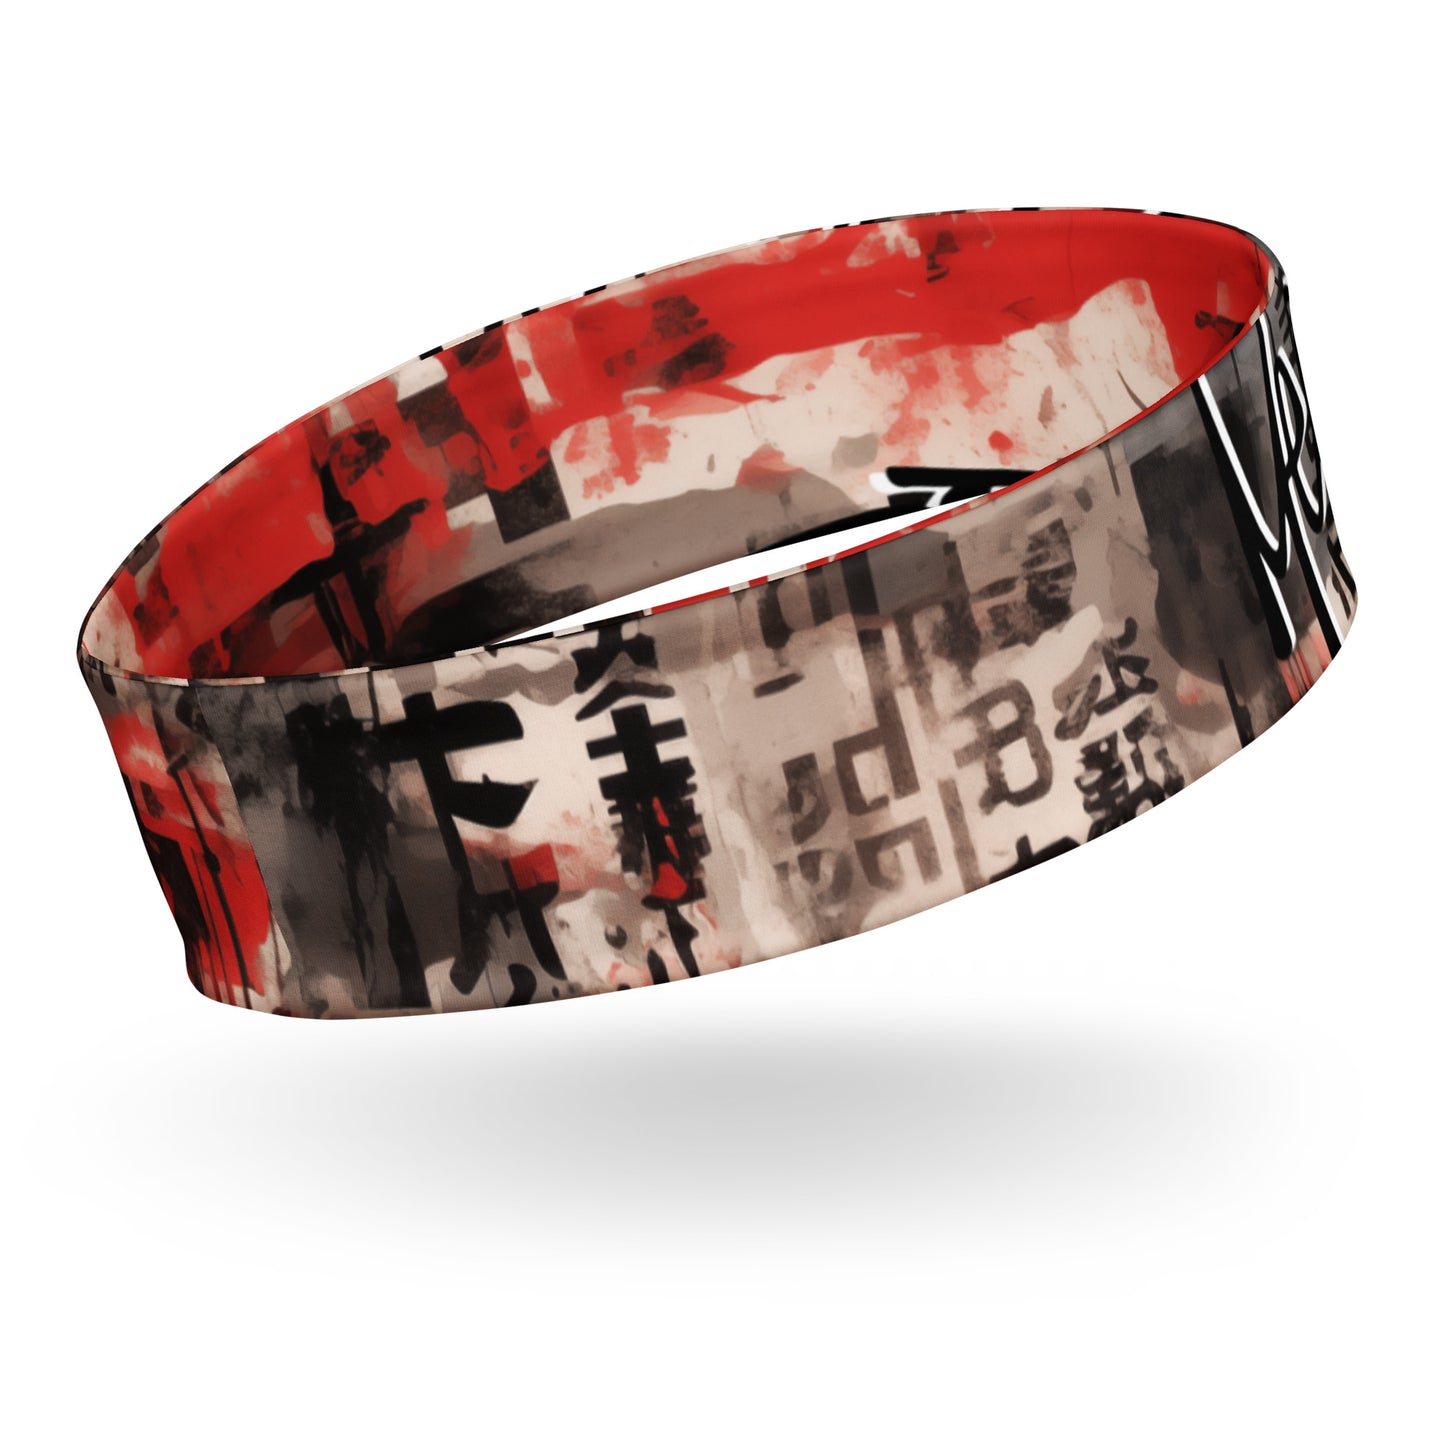 Artistic Heritage: Embrace the allure of Japanese newspapers adorned with red wash, creating a headband that echoes the bold and vibrant aesthetic of traditional prints while adding a modern edge. Premium Material: Crafted from 82% polyester and 18% spandex, the headband guarantees a soft and stretchy feel. It marries the timeless 